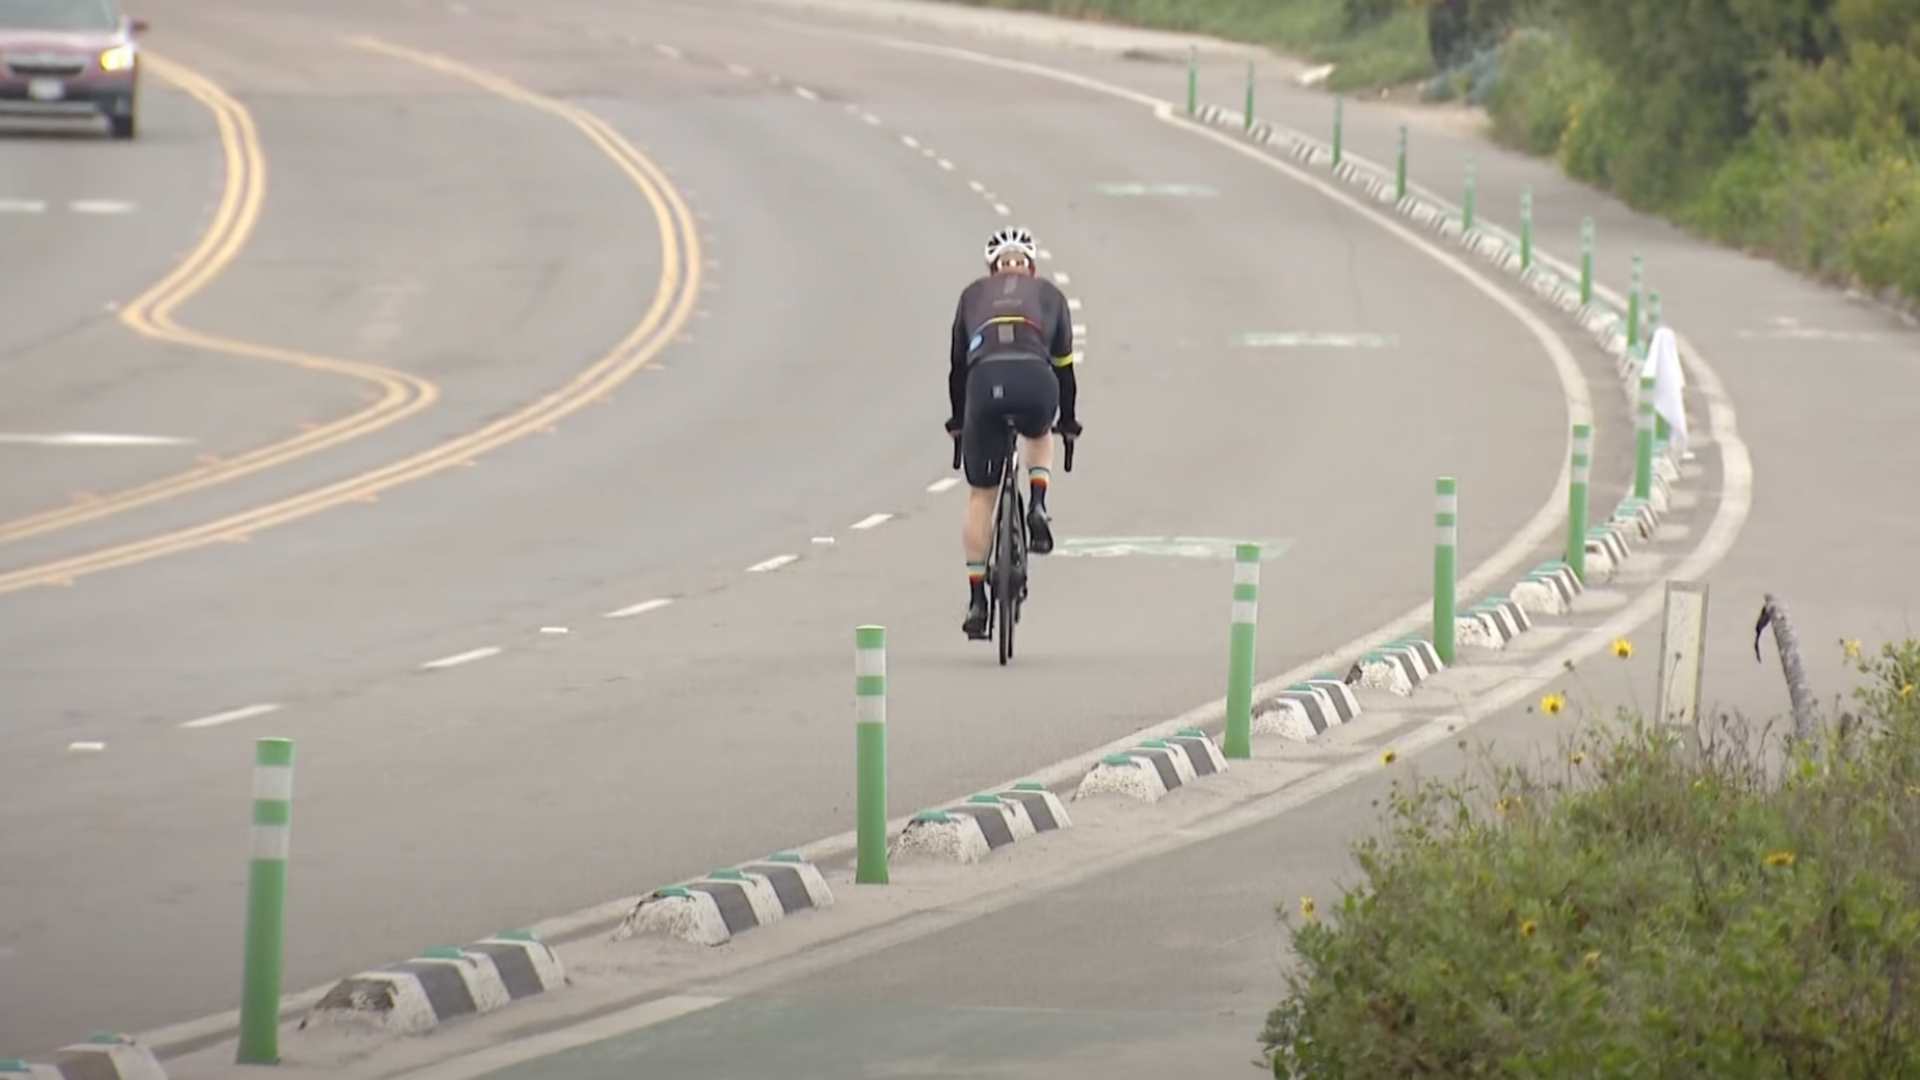 They will increase bike lanes in San Diego, California